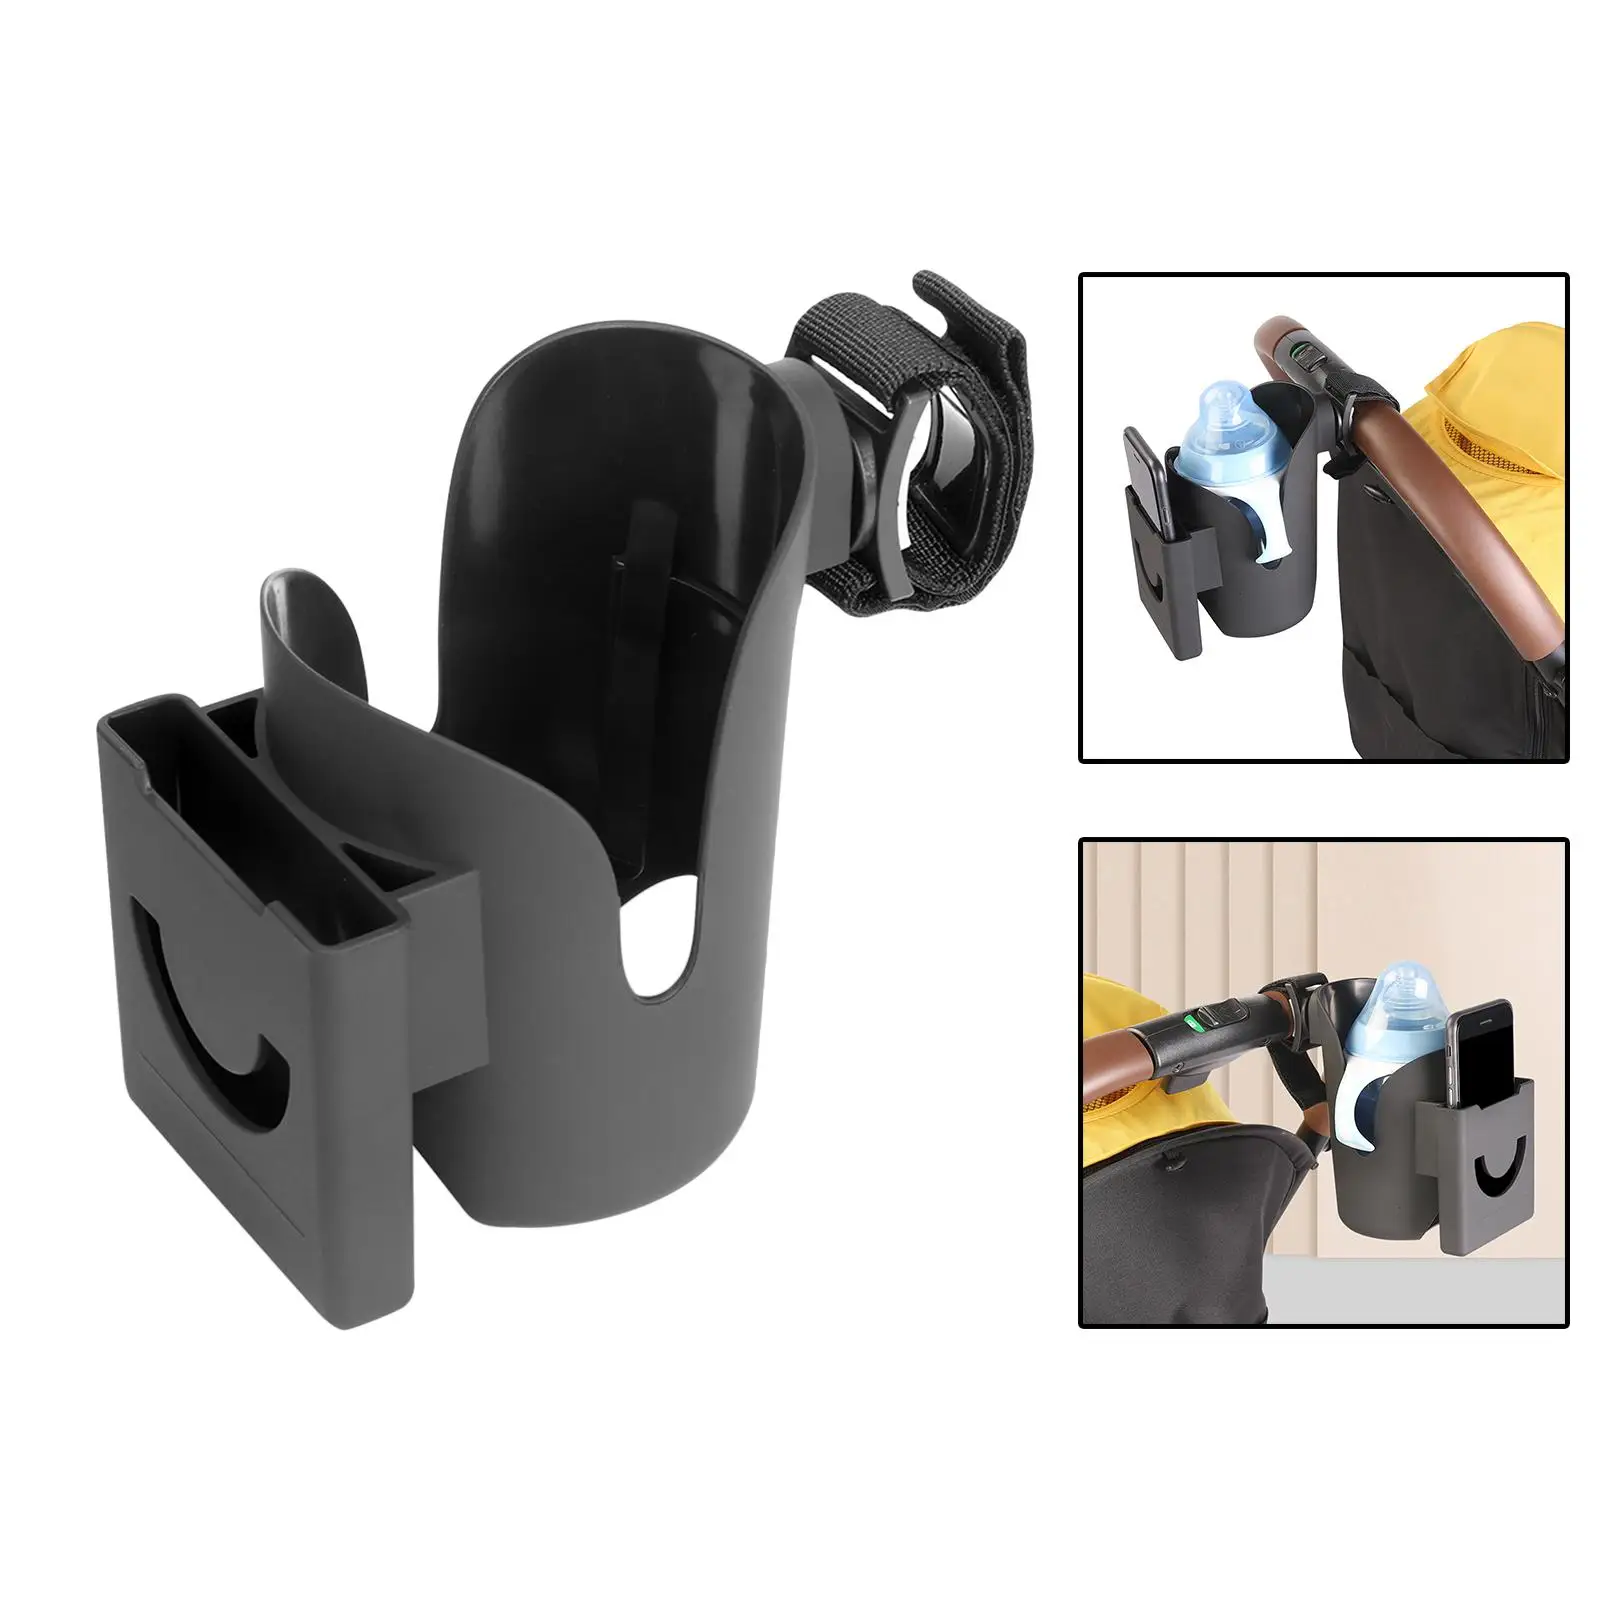 Stroller Cup Holder Attachment Large Caliber Fits Most Cups Storage Rack for Bike Scooter Walker Pushchair Accessories